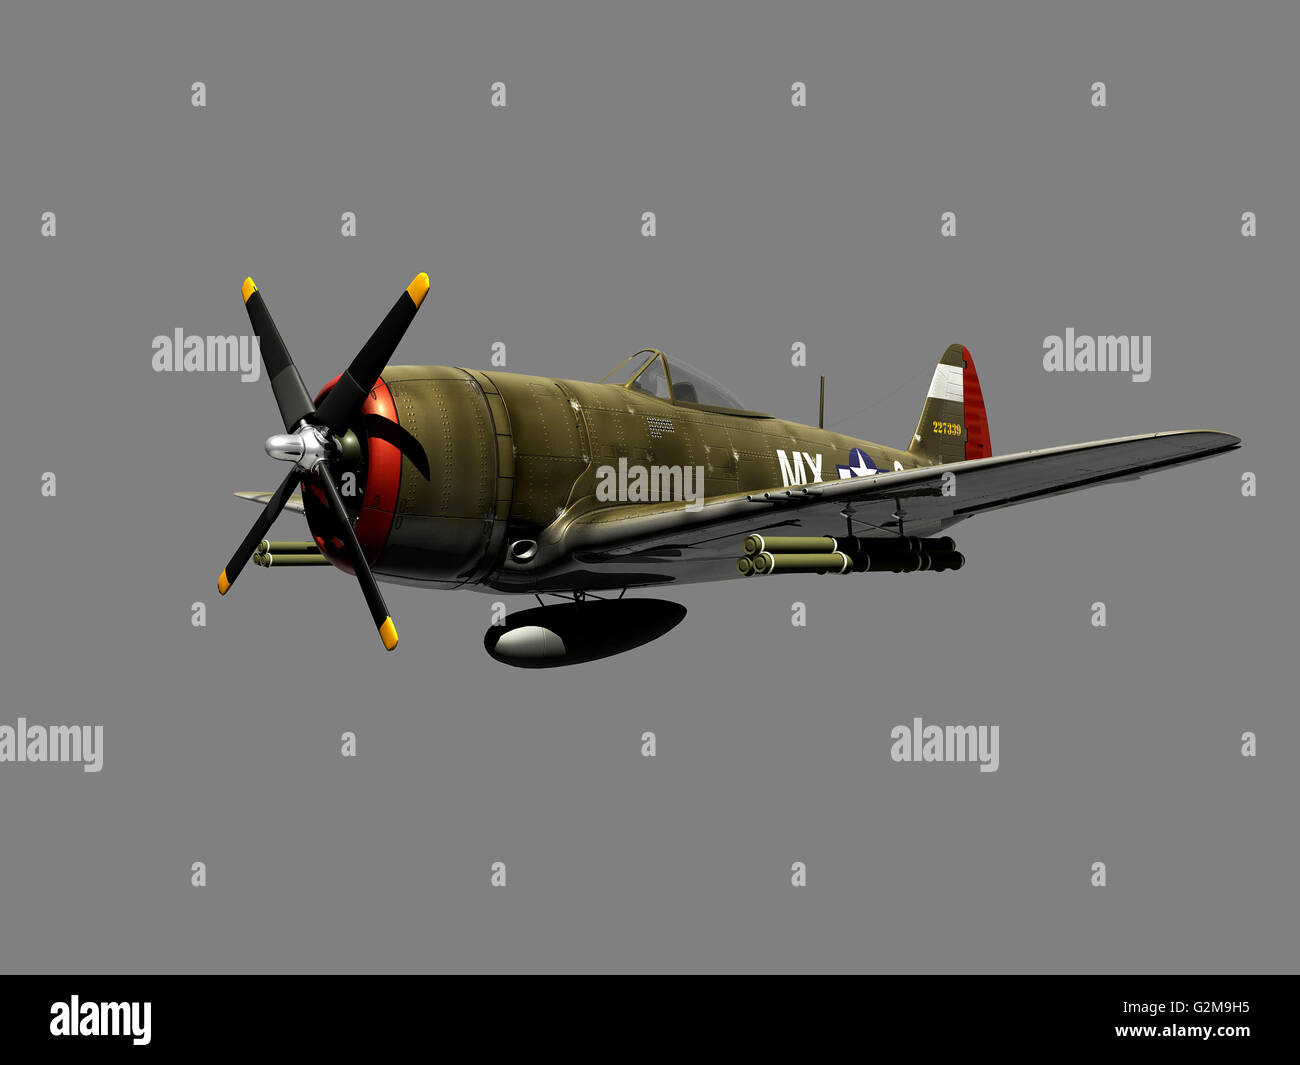 Military airplane against grey background, digitally generated image Stock Photo